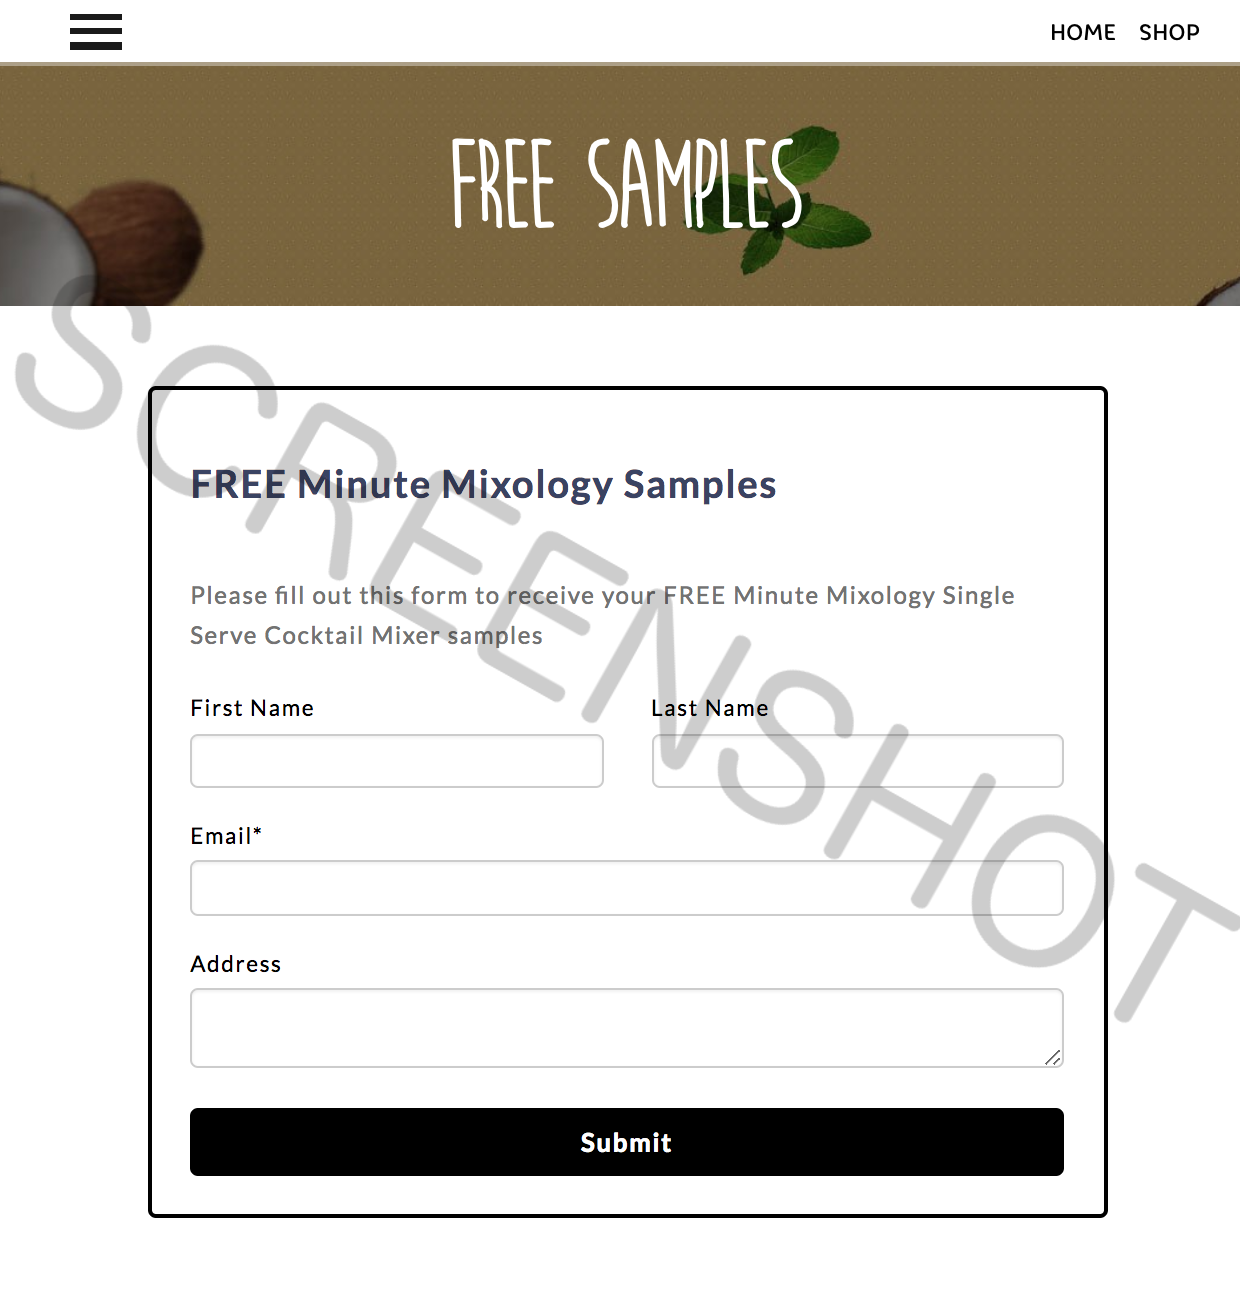 FREE Offer Page Screenshot